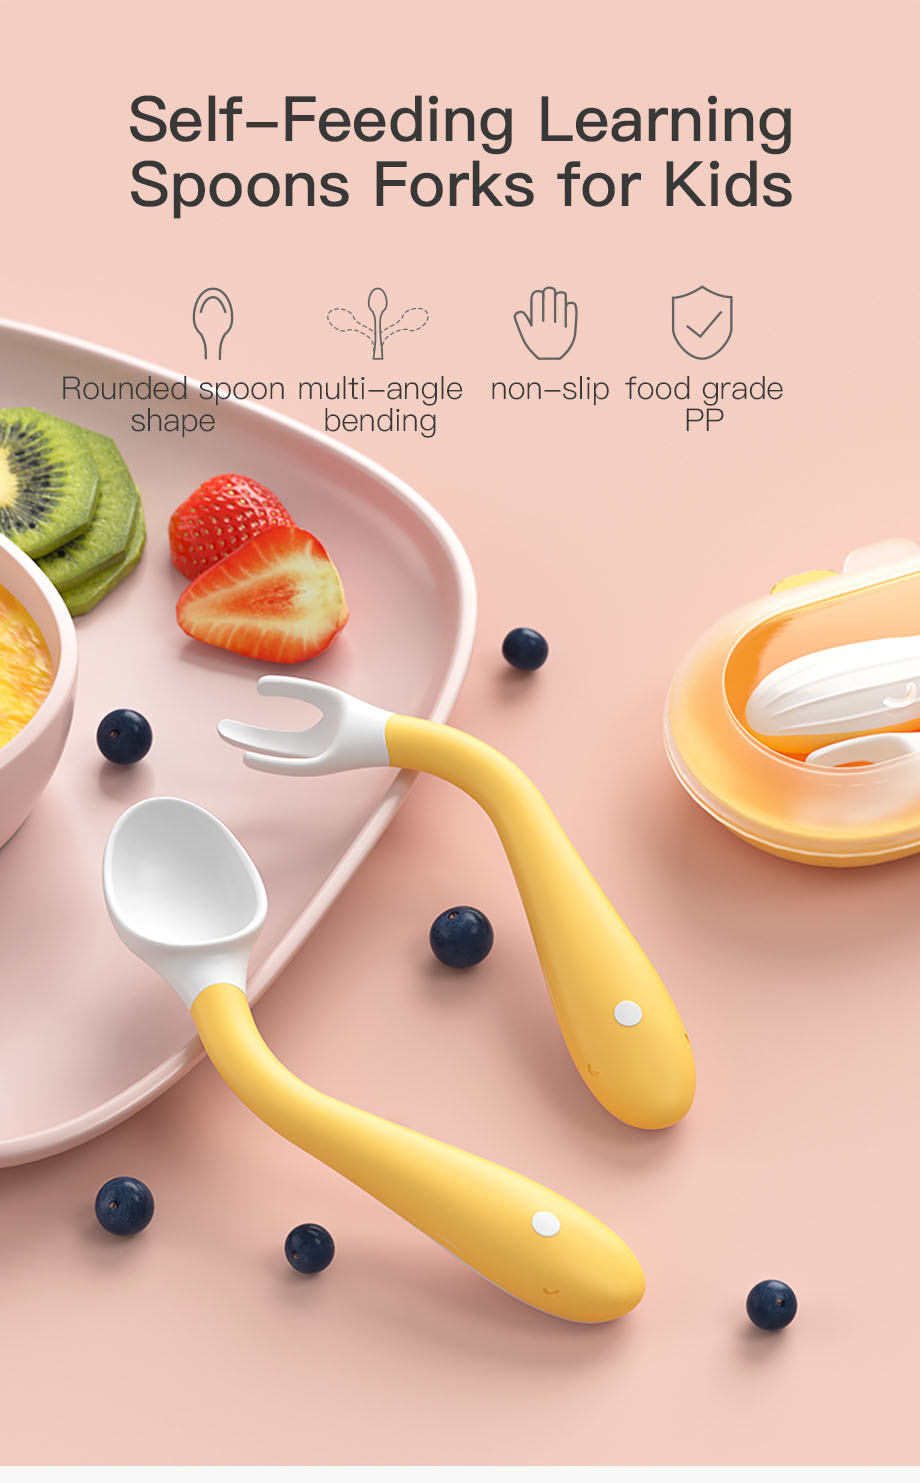 Rounded Baby Silicon Spoon And Fork